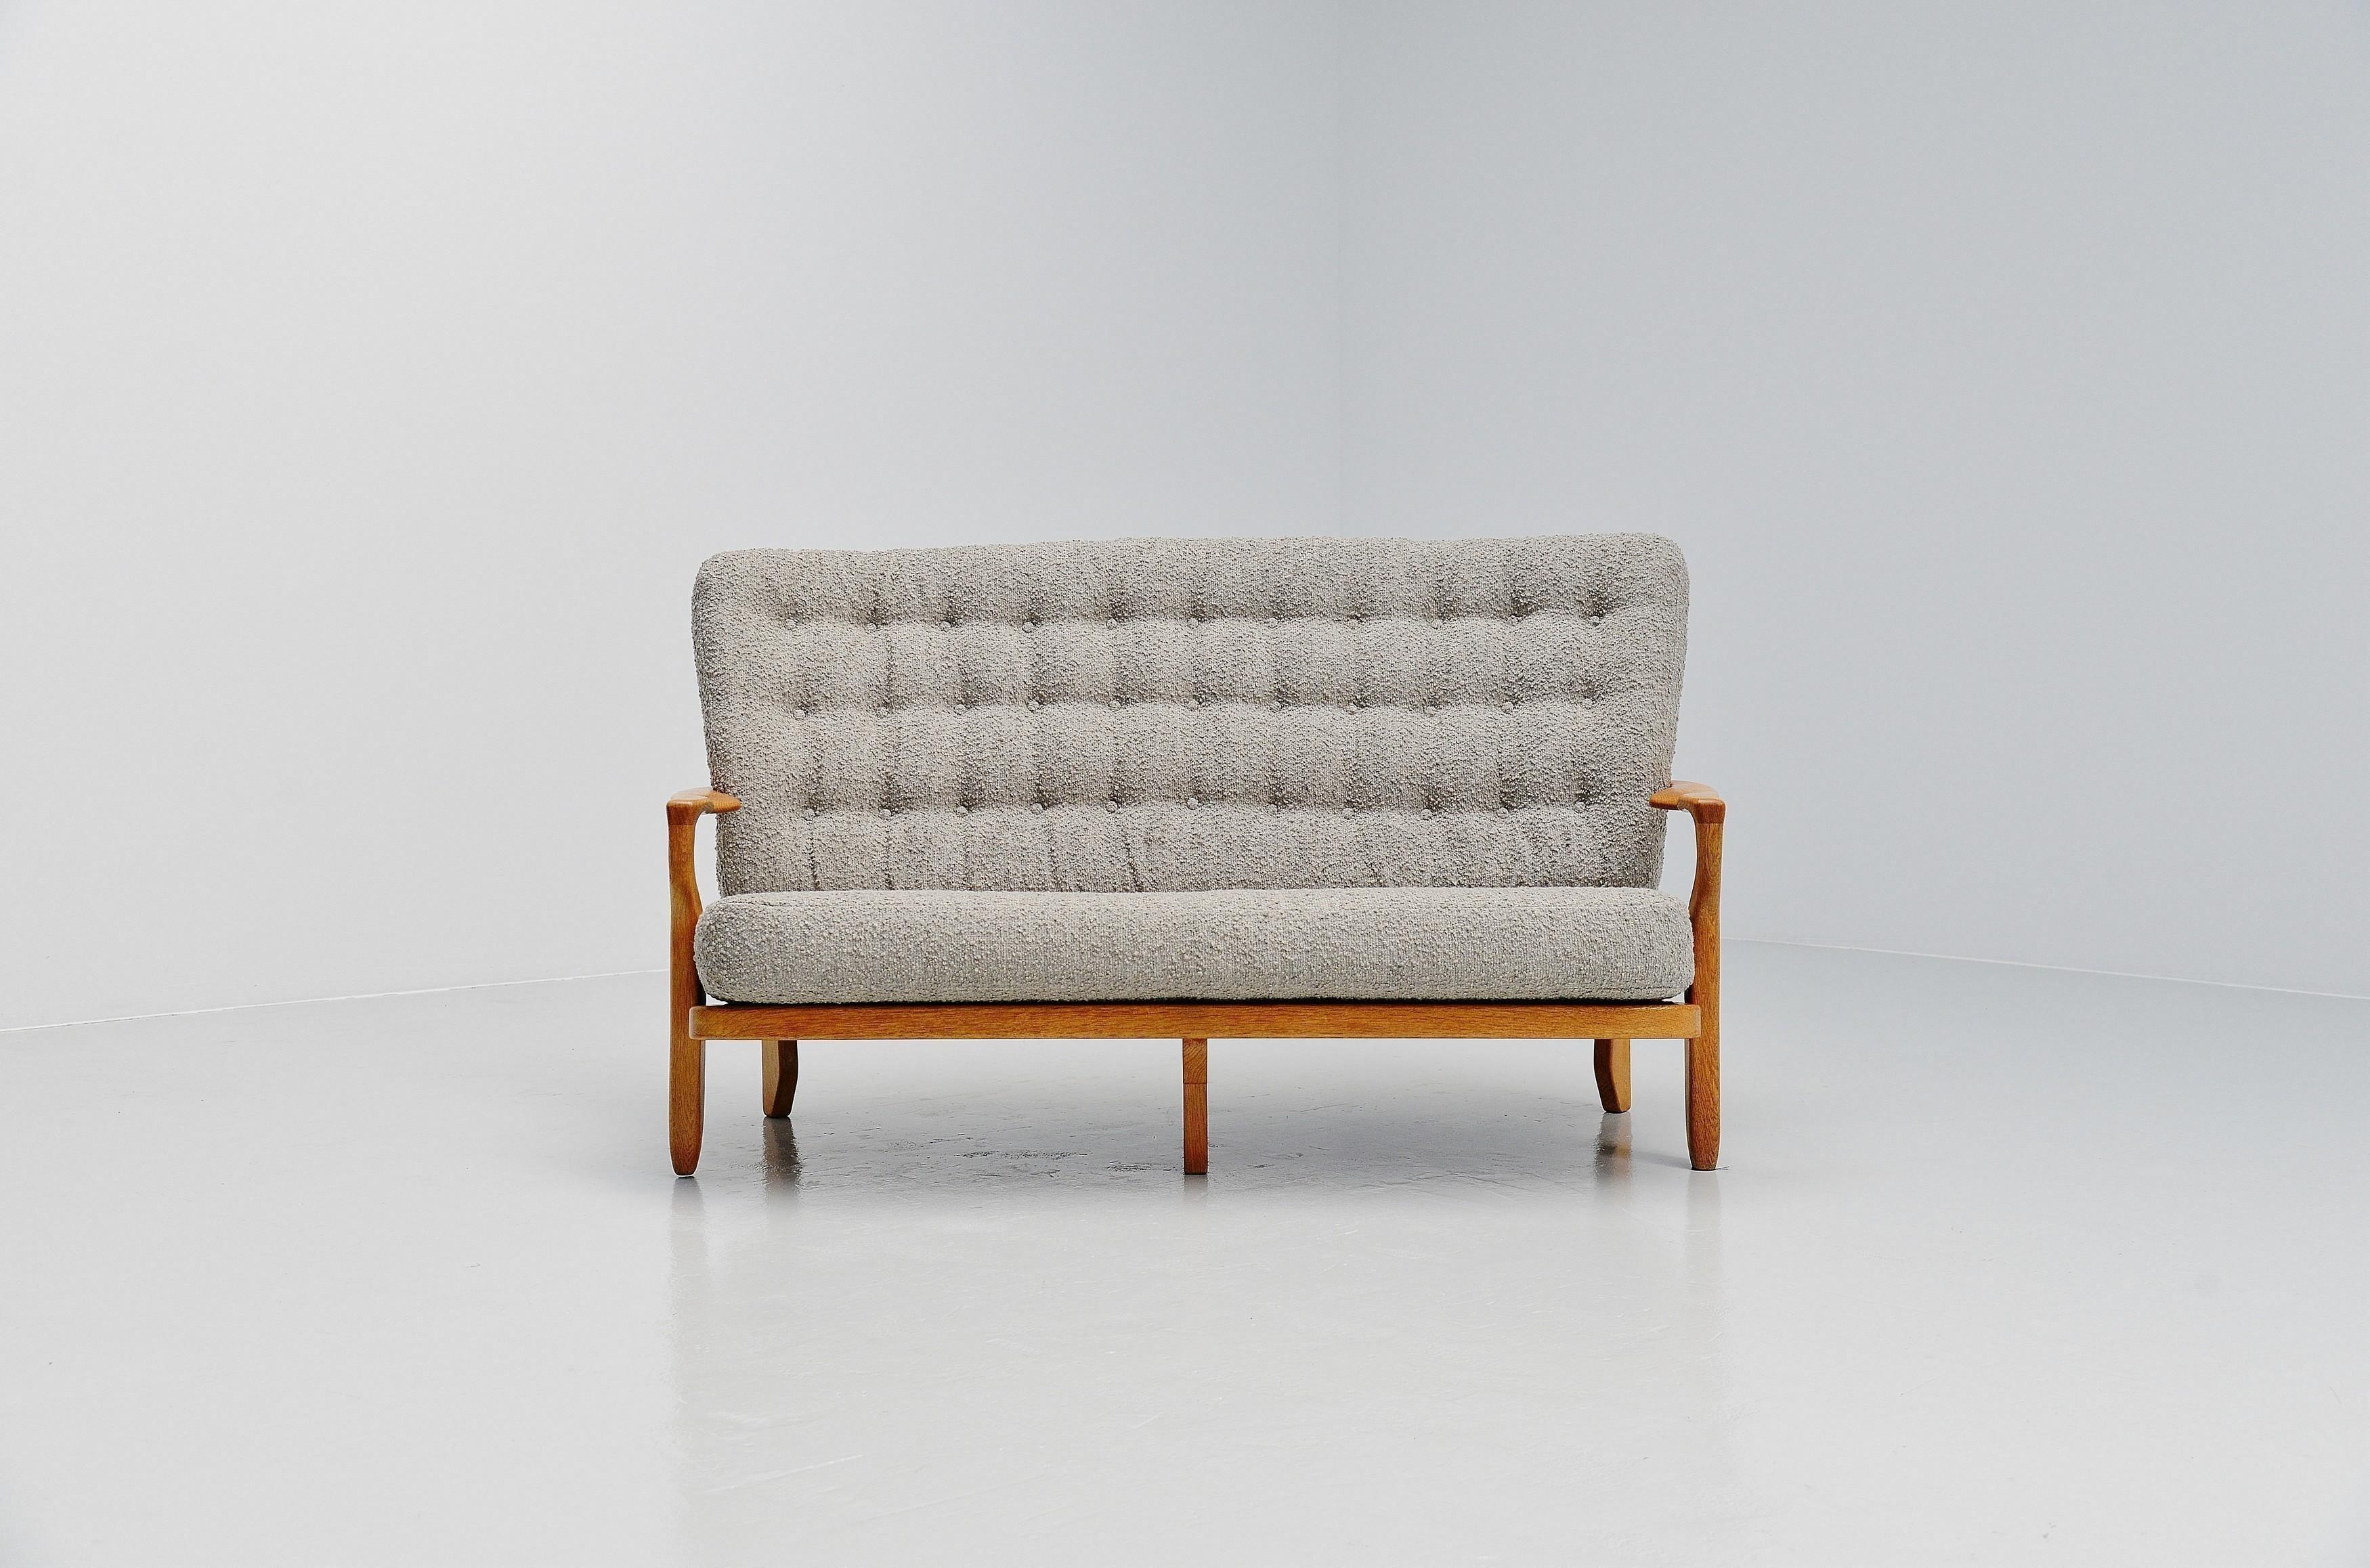 Excellent pair of  'Juliette' sofa's designed by Robert Guillerme et Jacques Chambron, France 1955. These sofas have very nice open structure made of solid oak carved spines, that is what this designer duo was known for. They are newly upholstered